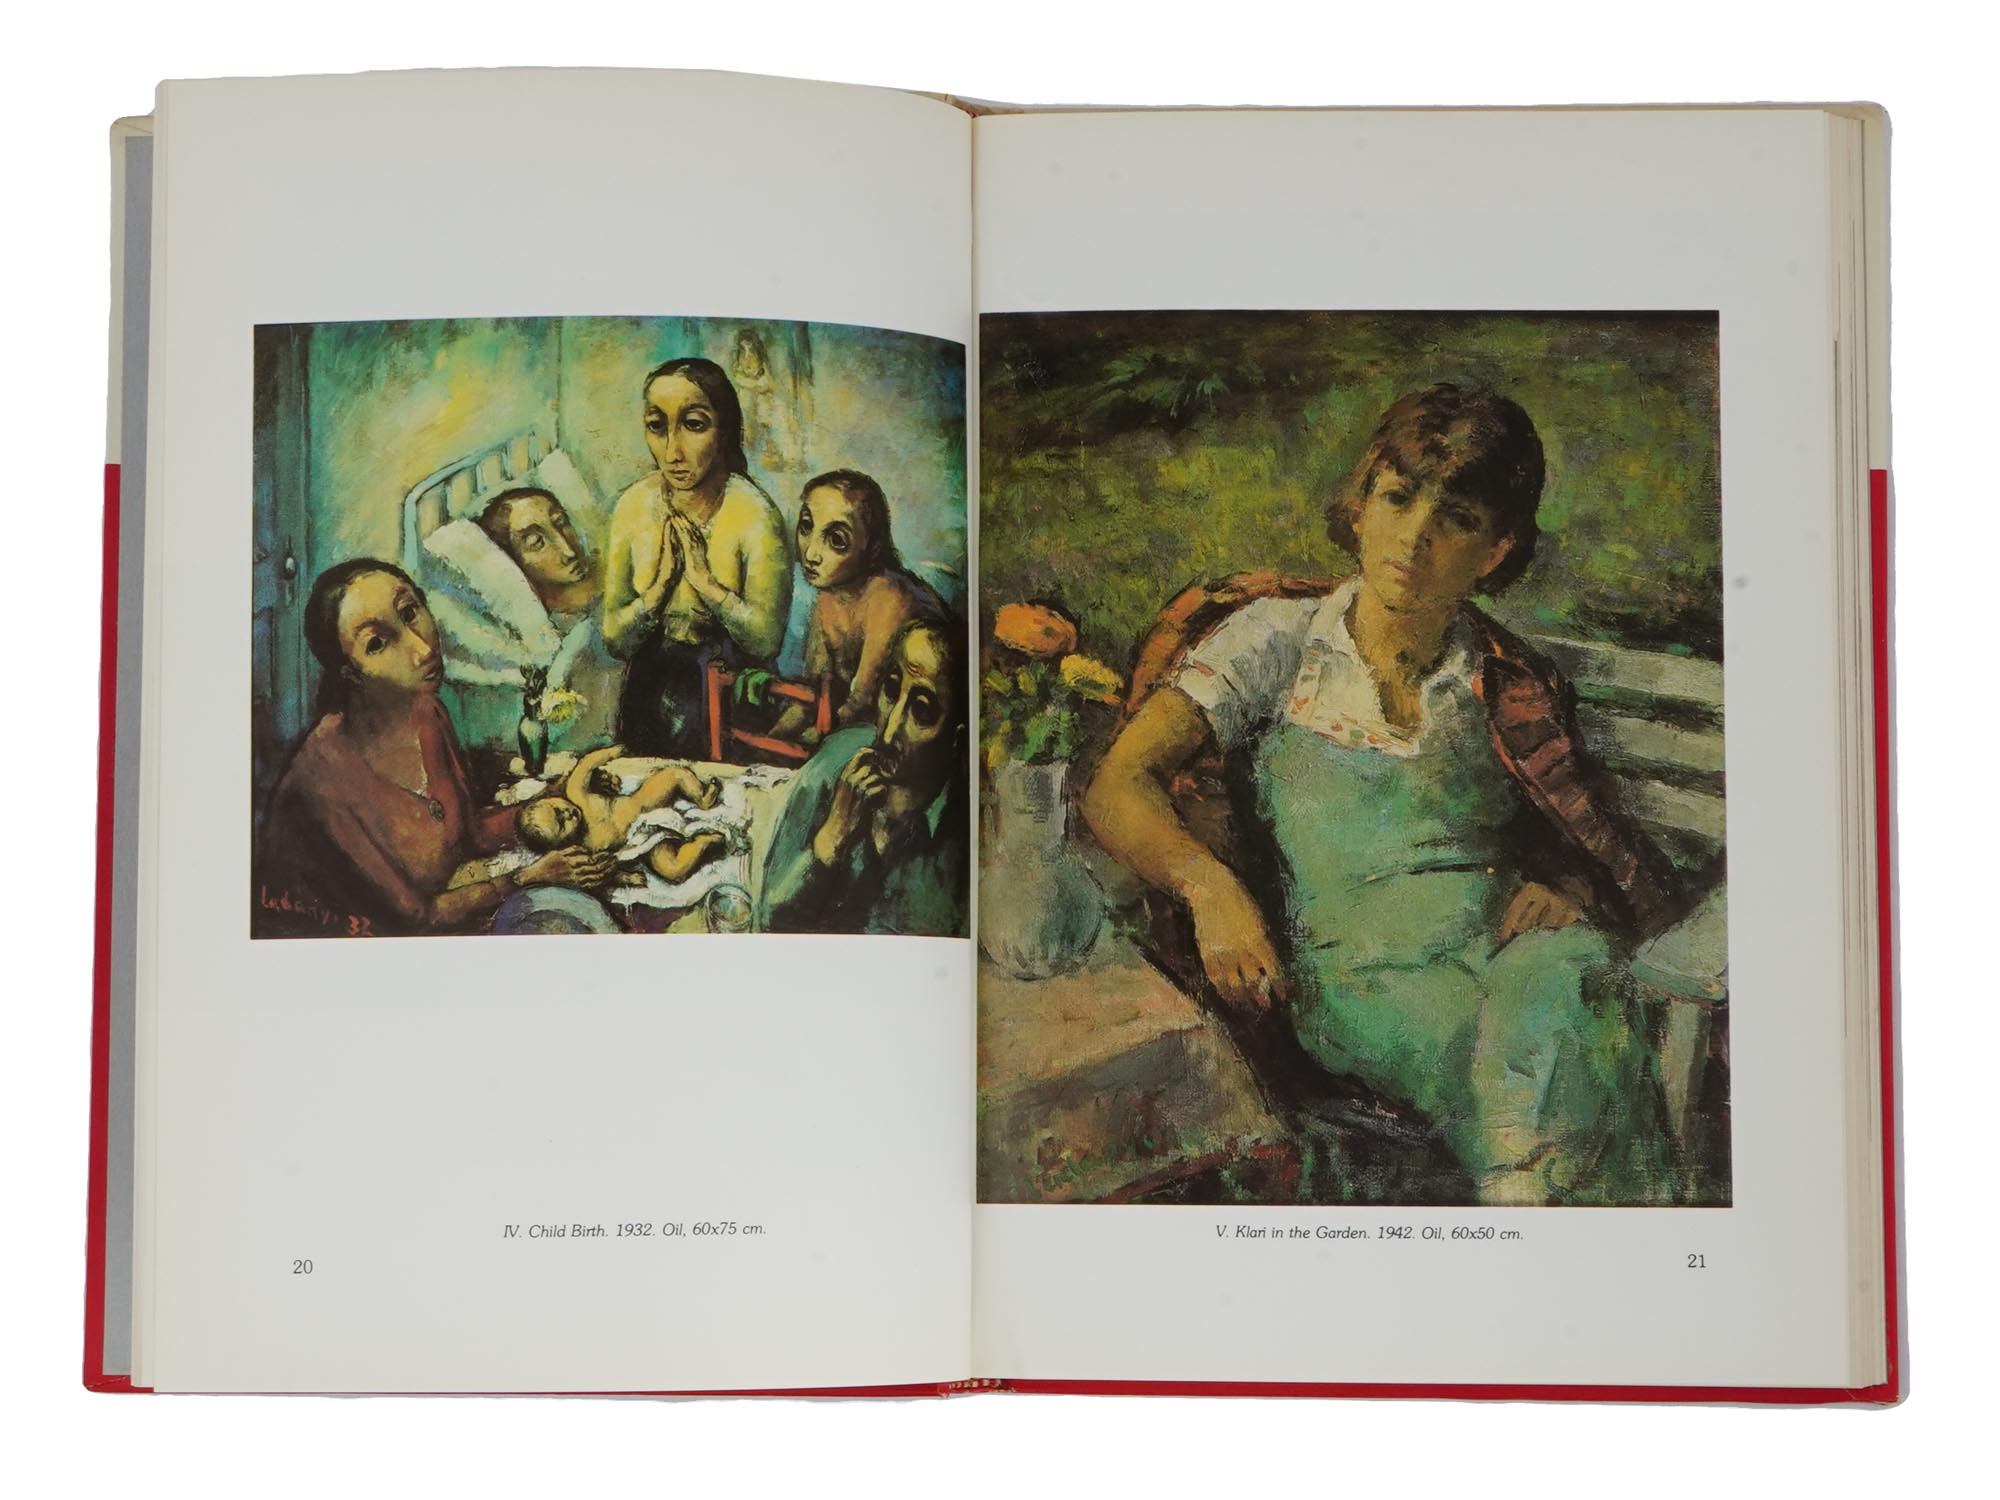 AMERICAN MODERNIST PAINTING BY EMORY LADANYI AND BOOK PIC-6